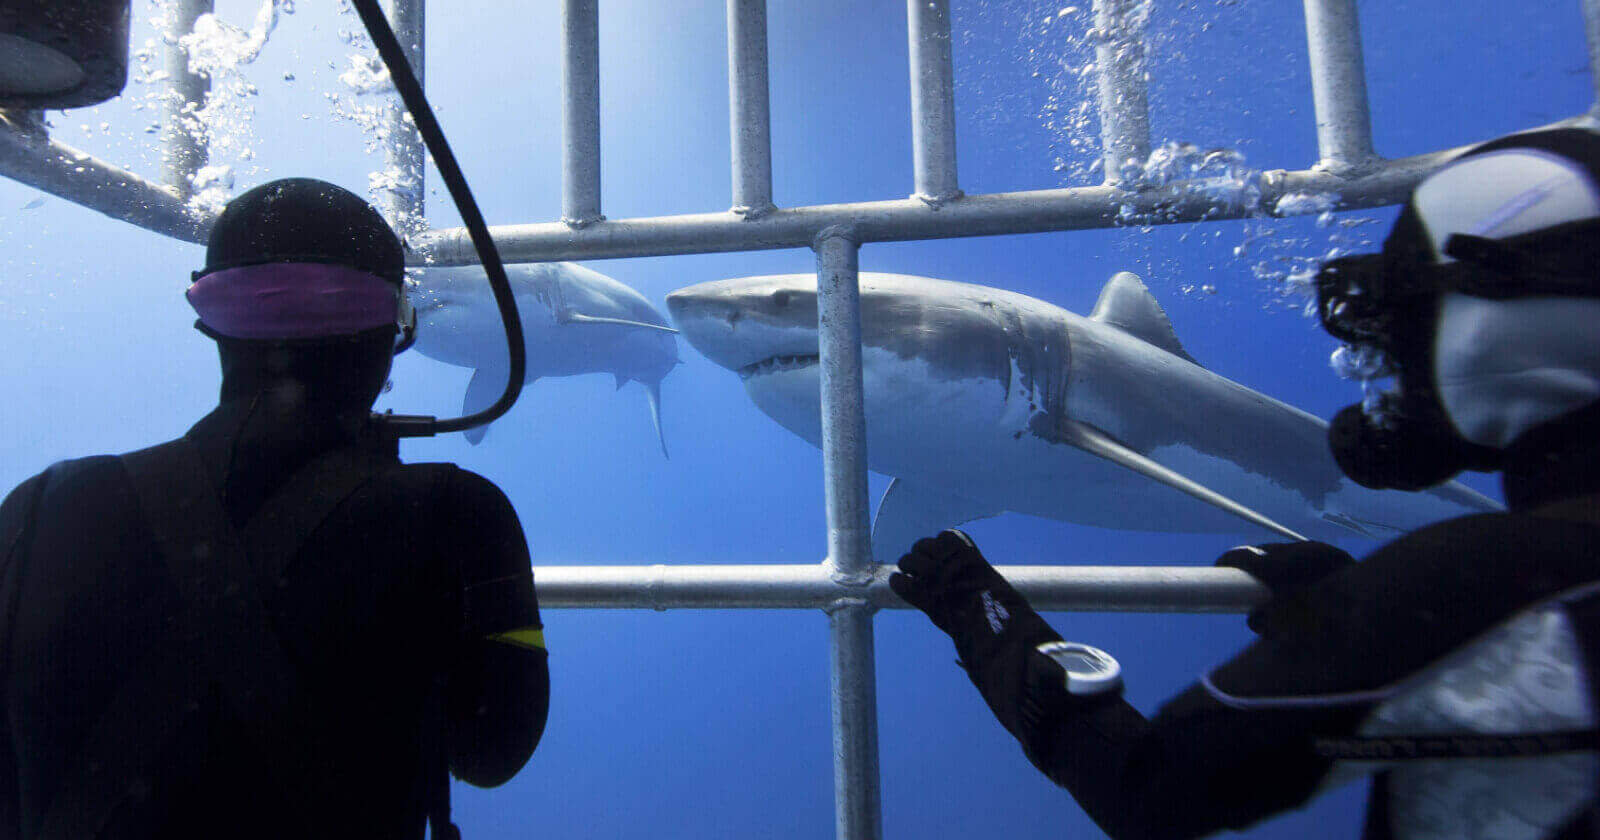 Overview of Shark cage diving